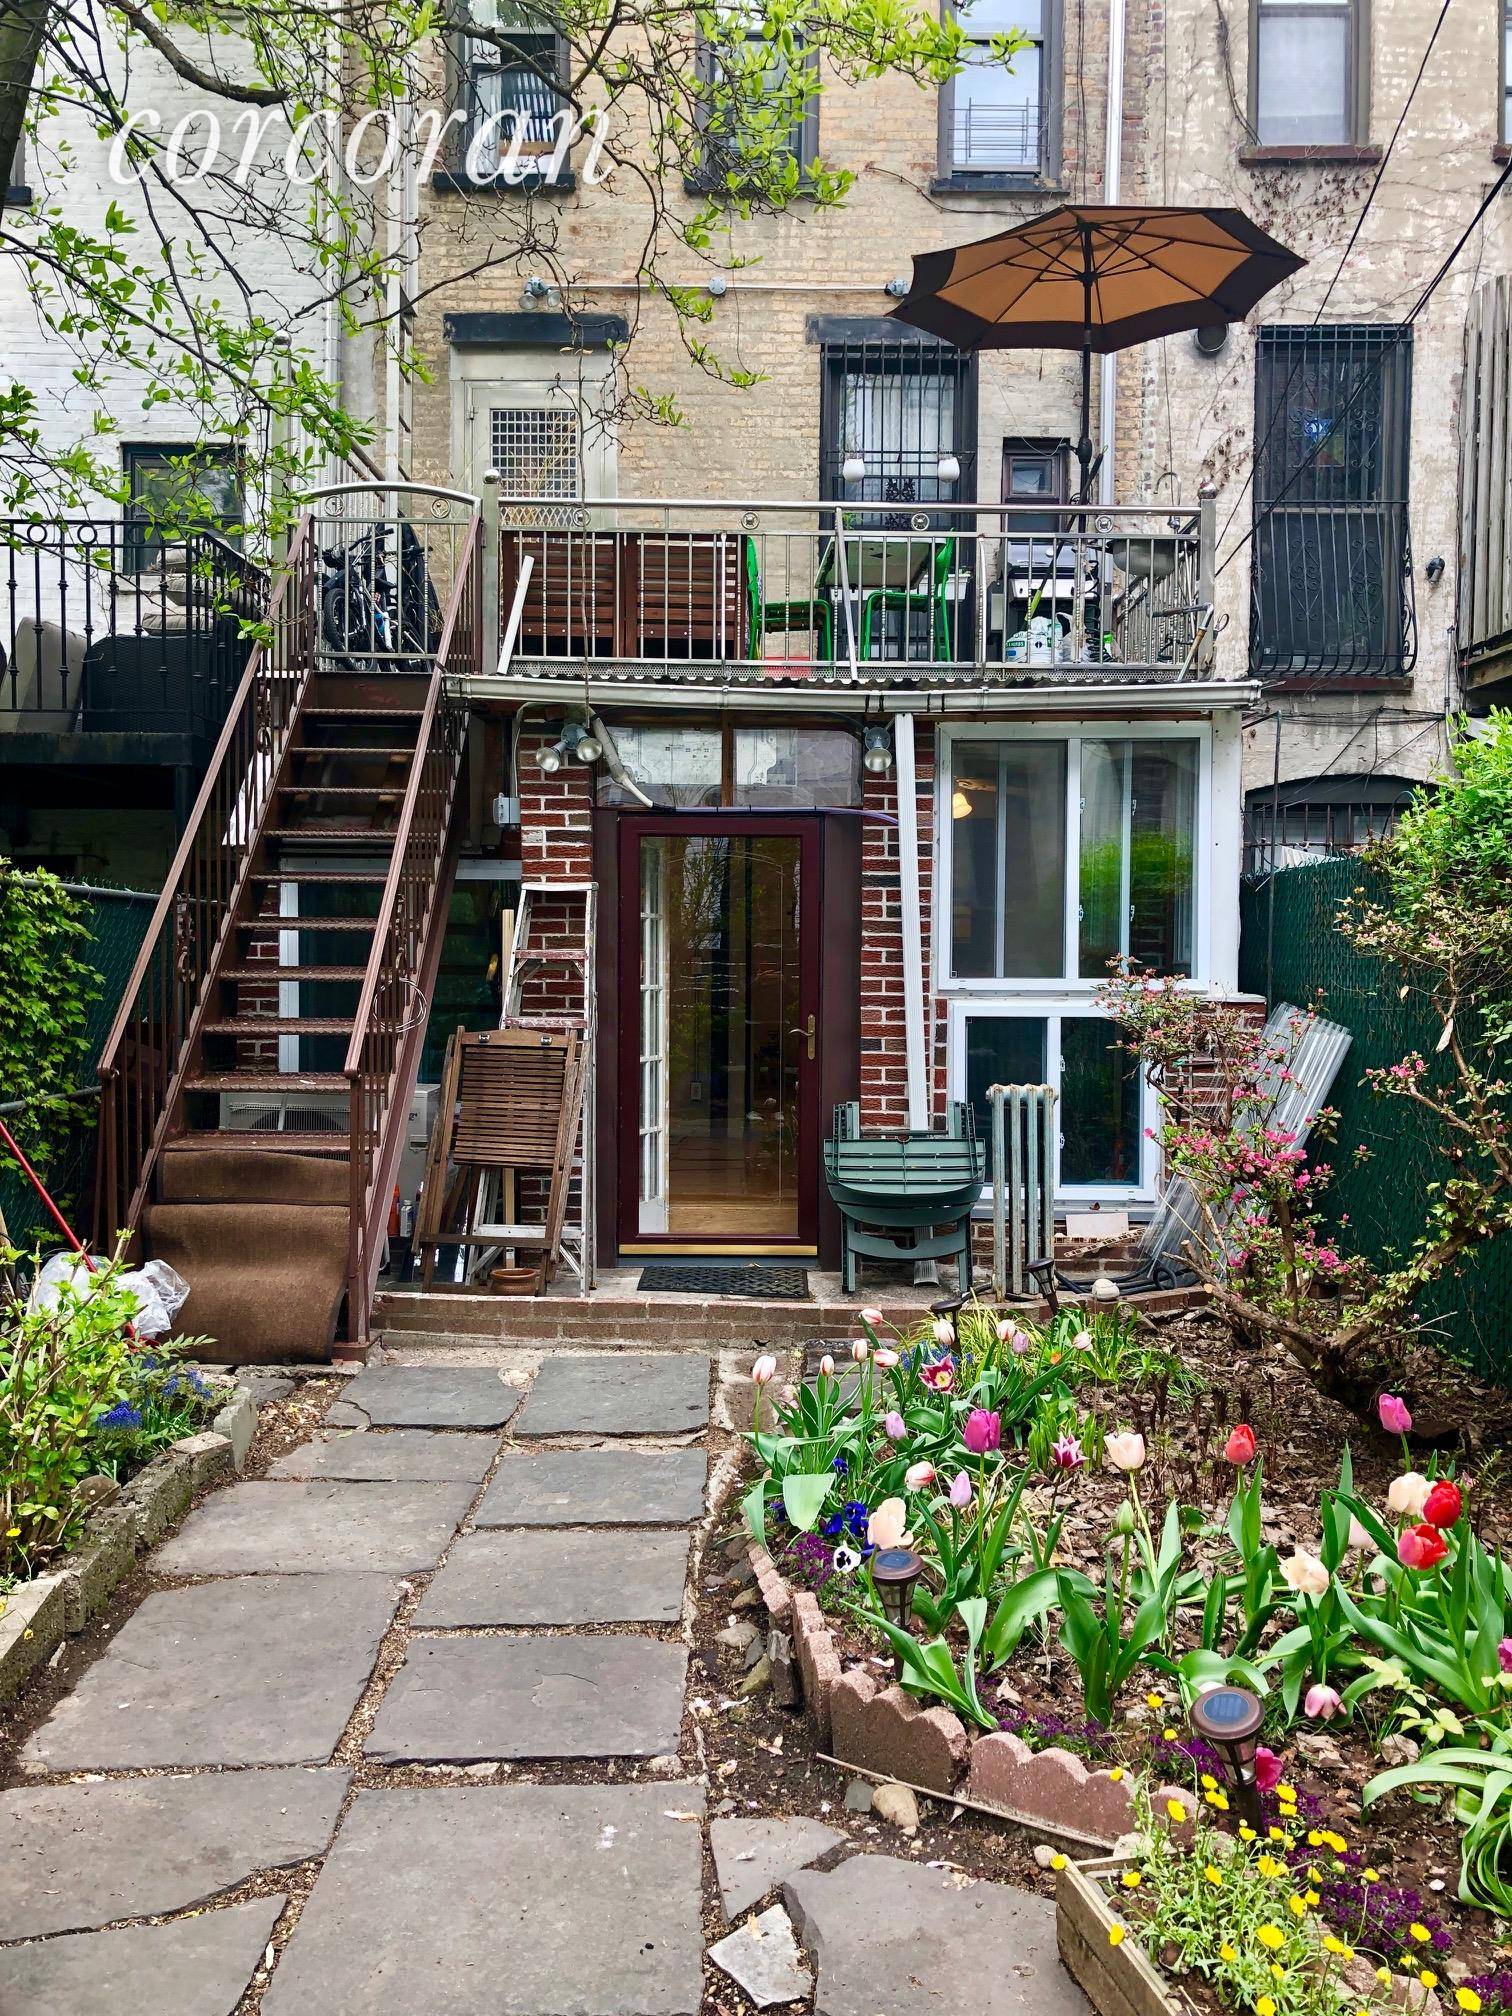 Live Who You Are. This beautiful garden apartment is in a pre war brownstone building.